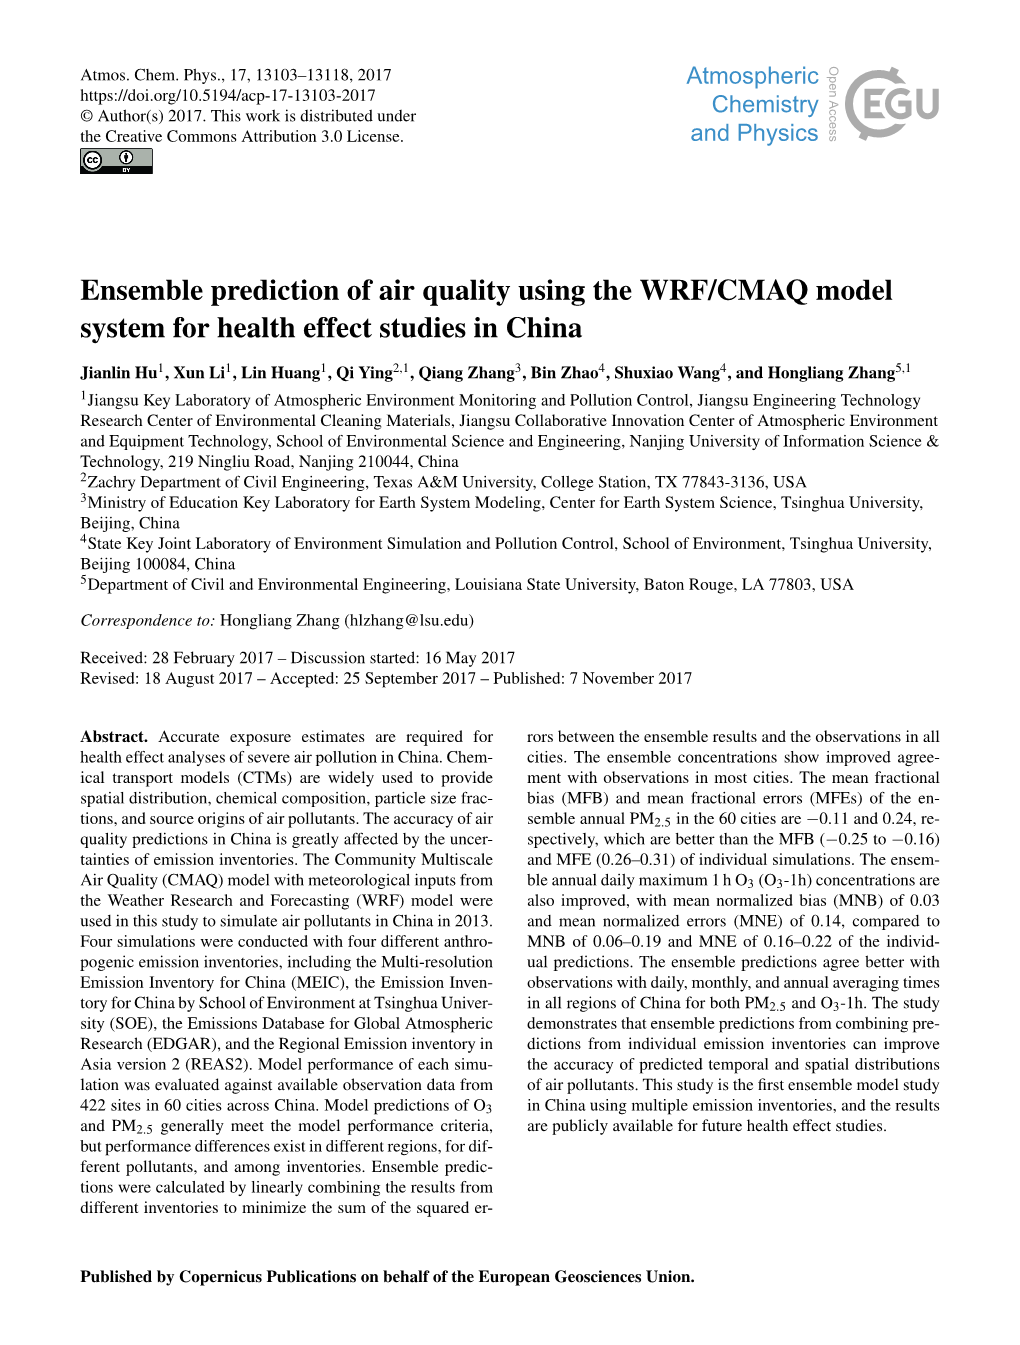 Article Size Frac- Bias (MFB) and Mean Fractional Errors (Mfes) of the En- Tions, and Source Origins of Air Pollutants